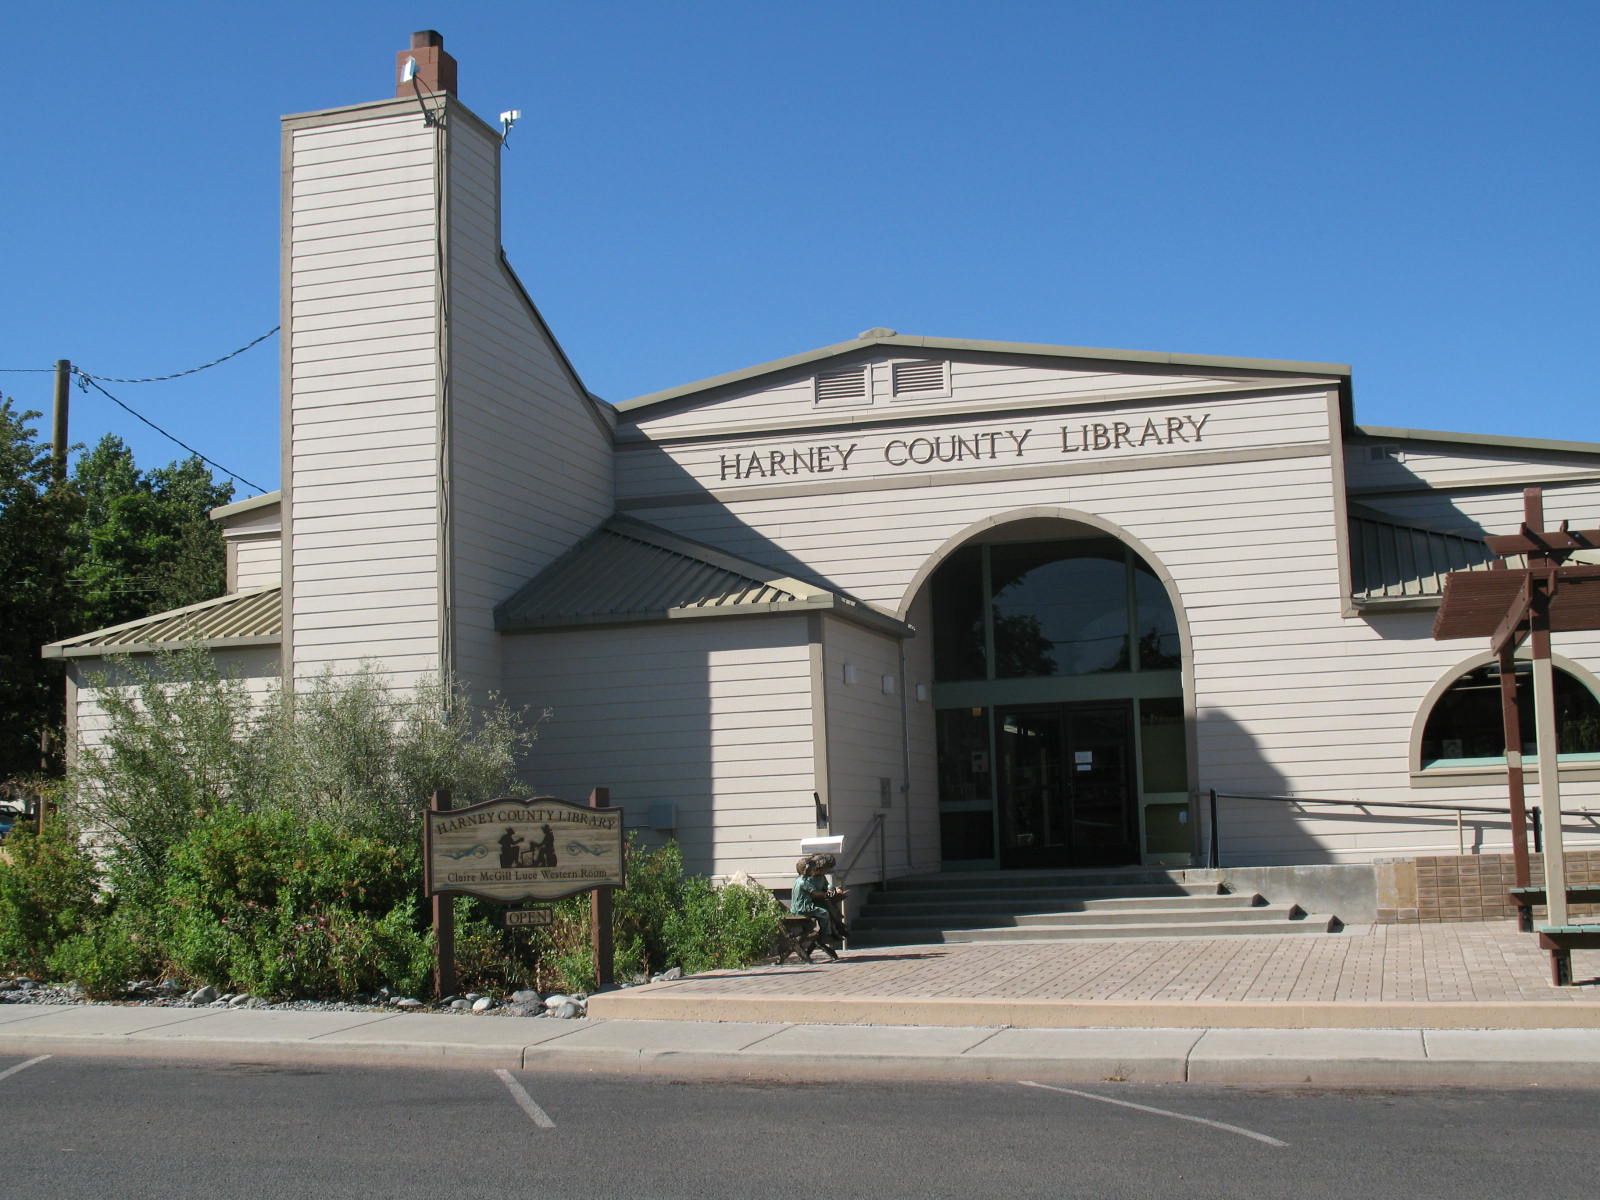 Harney County Library